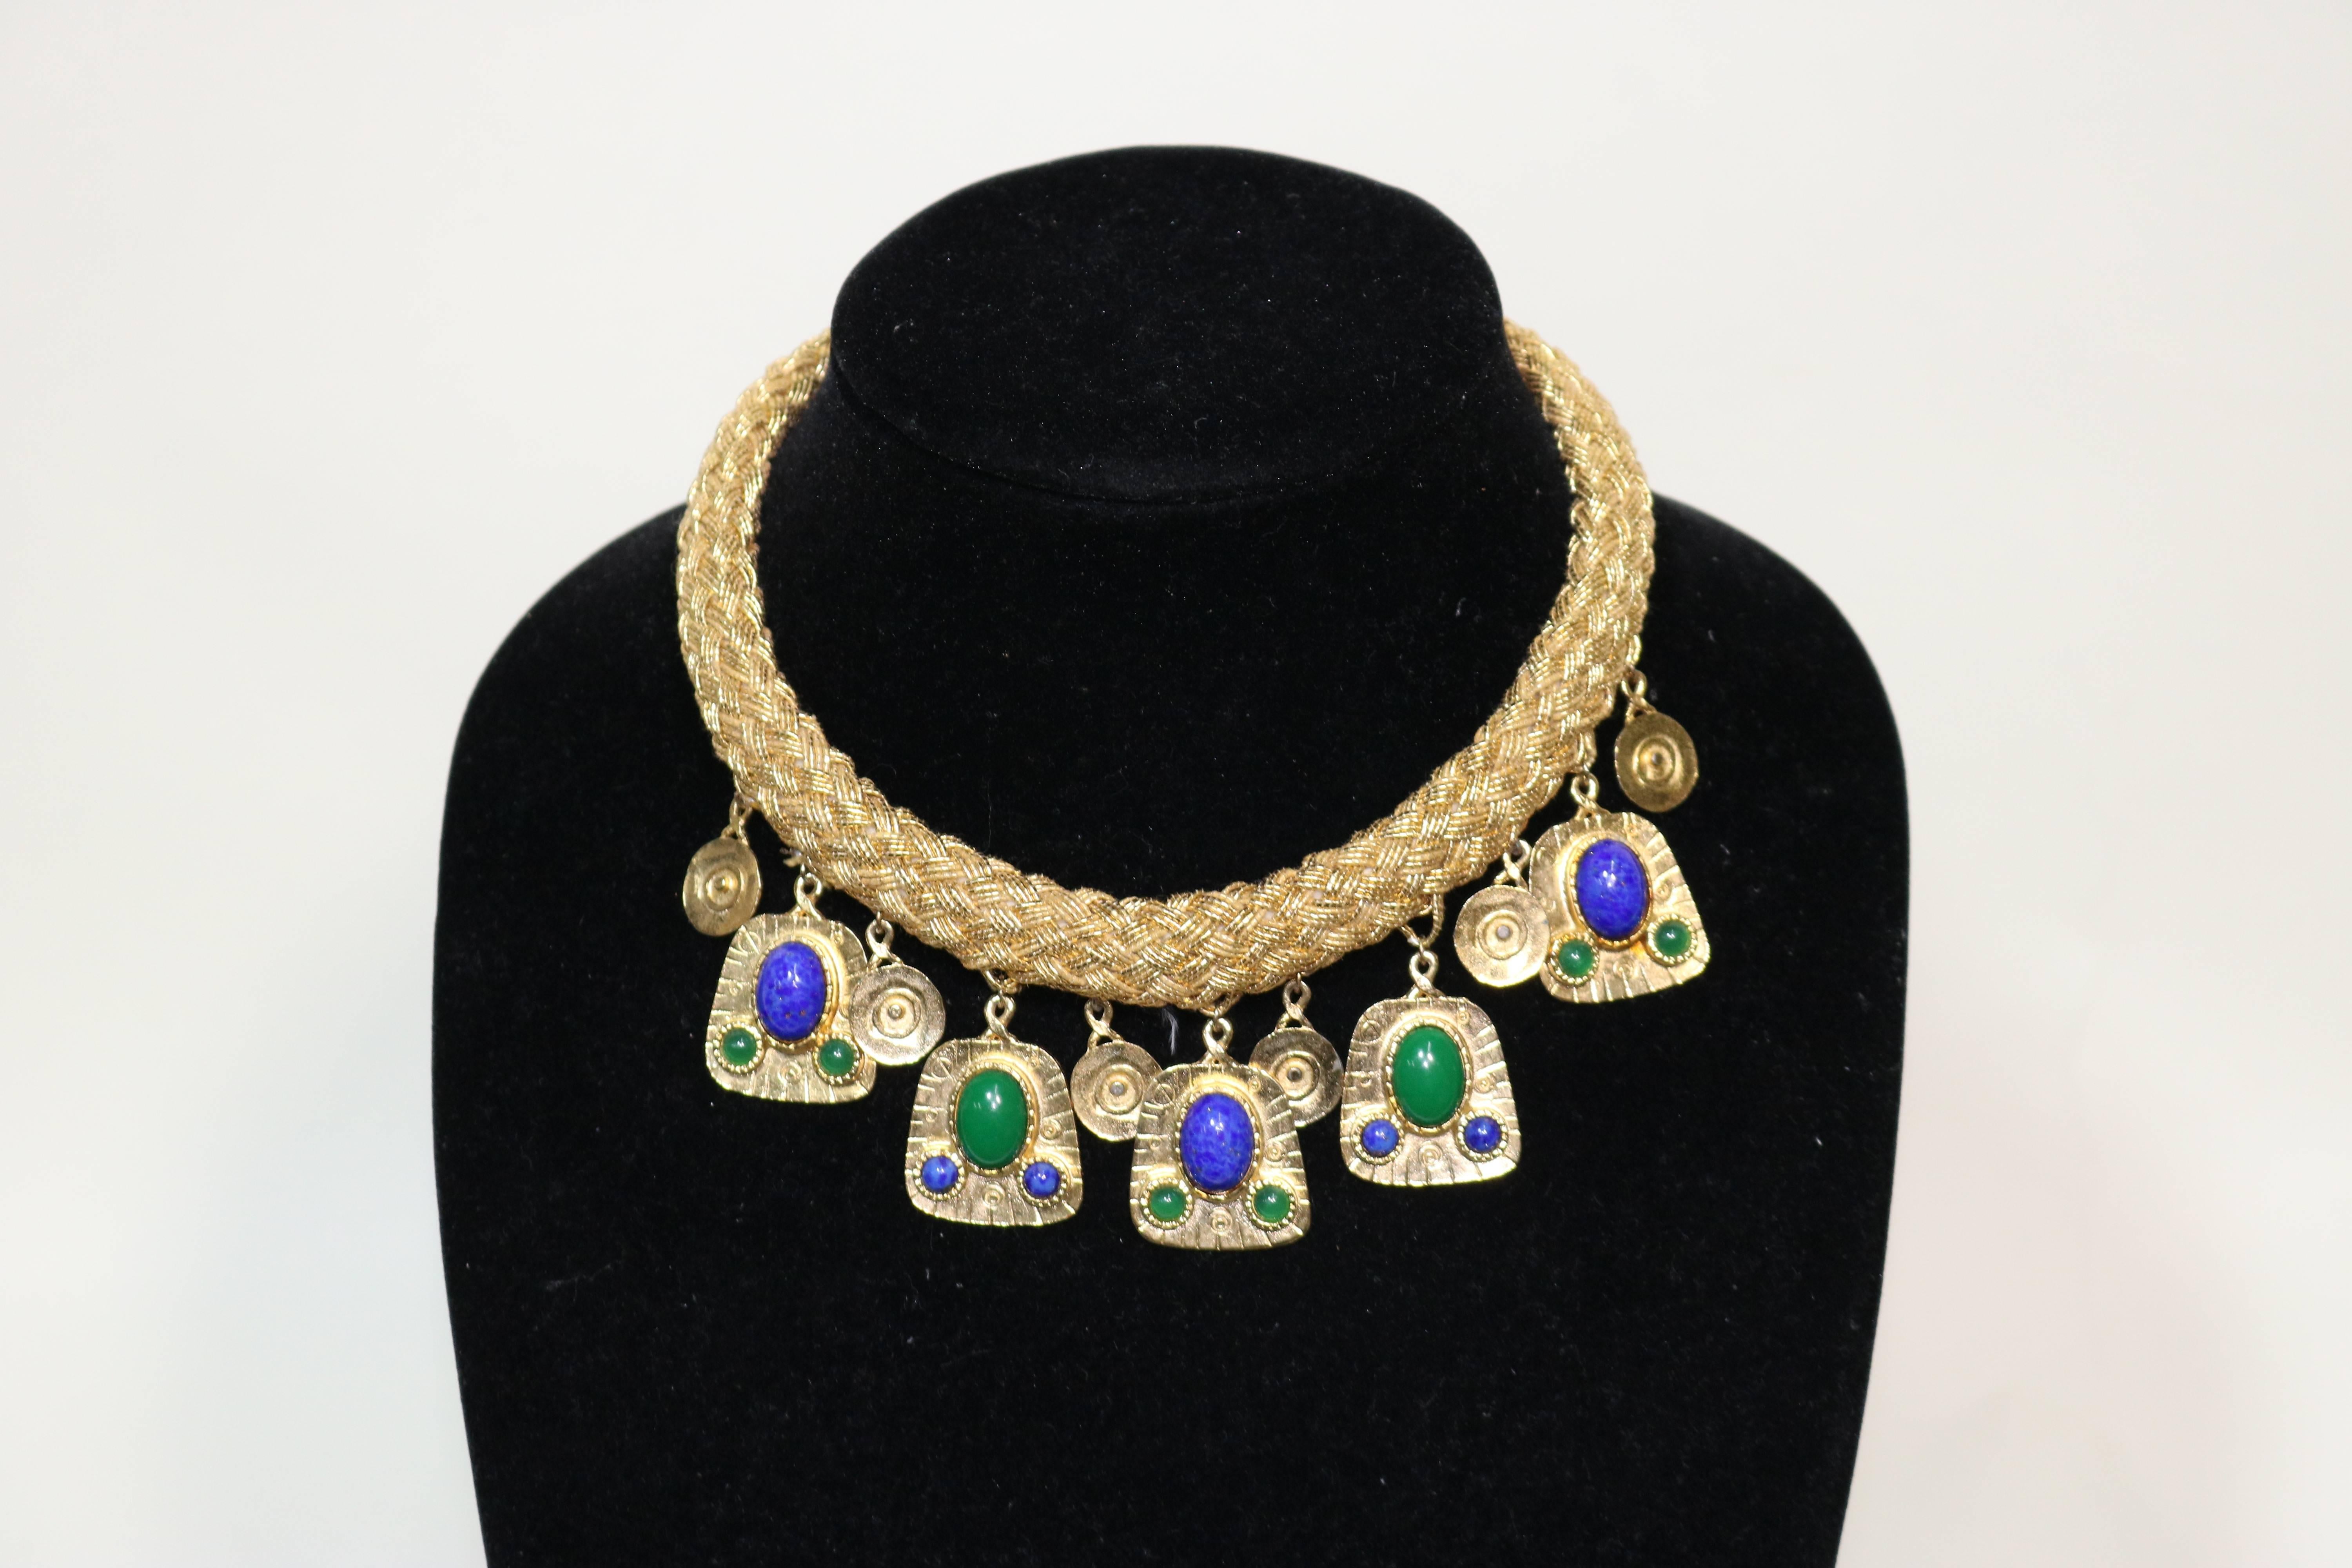 Gold Woven Strand Collar Necklace with Malachite and Lapis Drops In Excellent Condition For Sale In West Palm Beach, FL